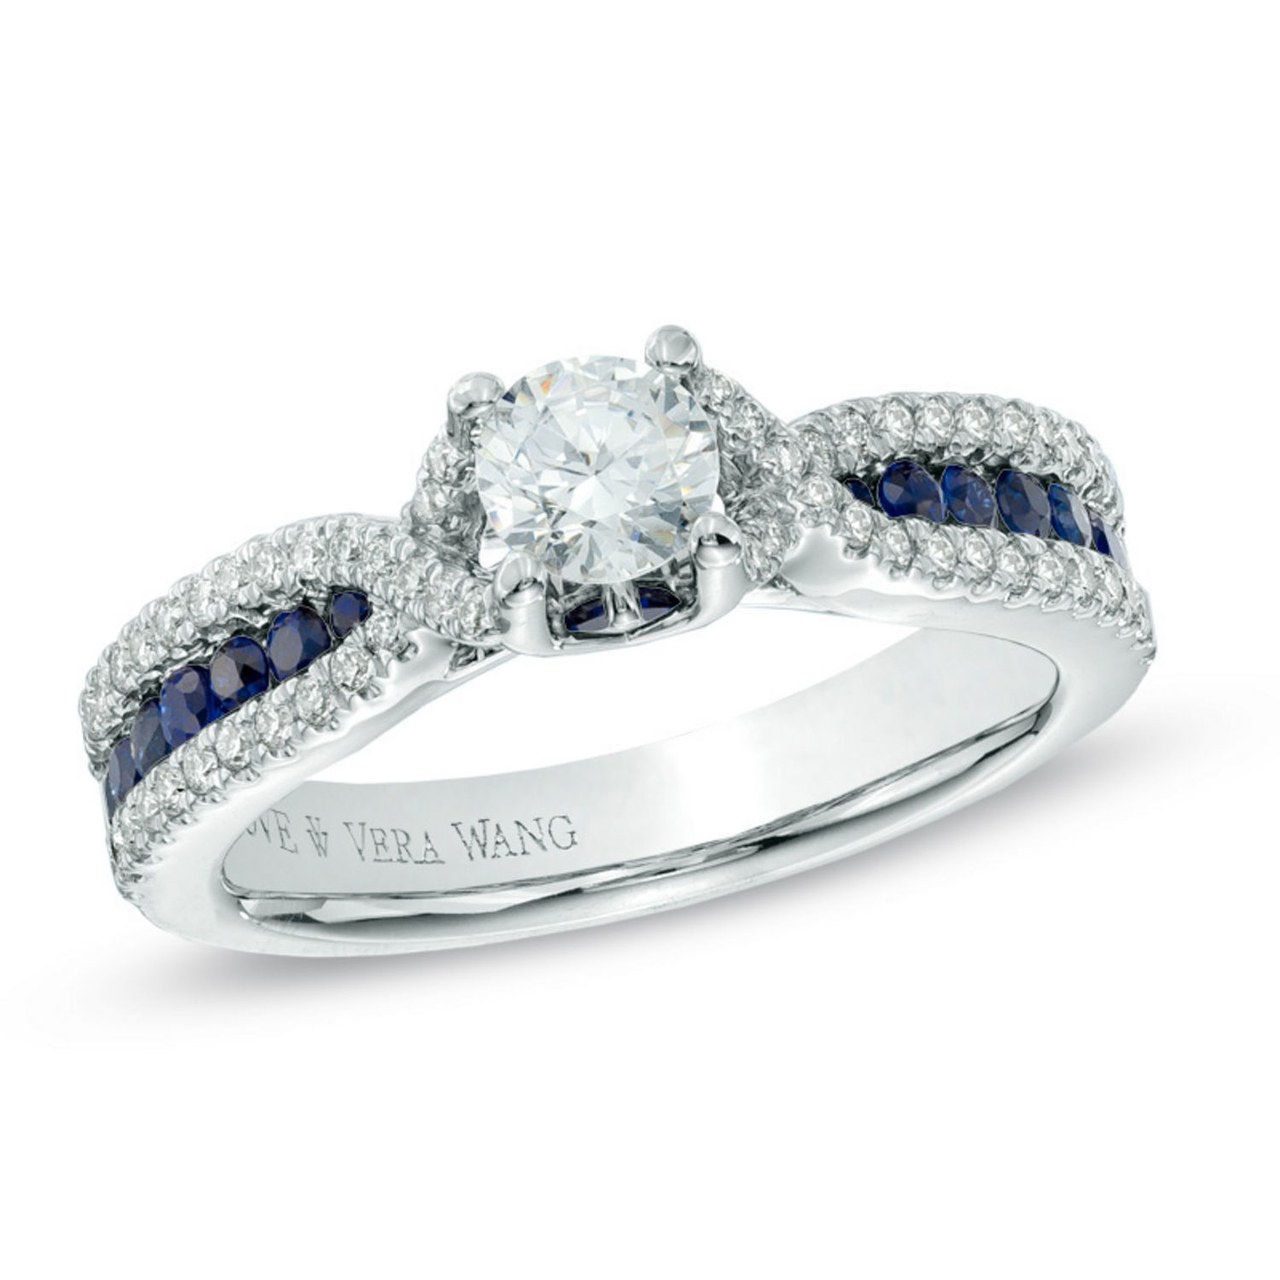 1a sapphire engagement rings 1026 courtesy vera wang love